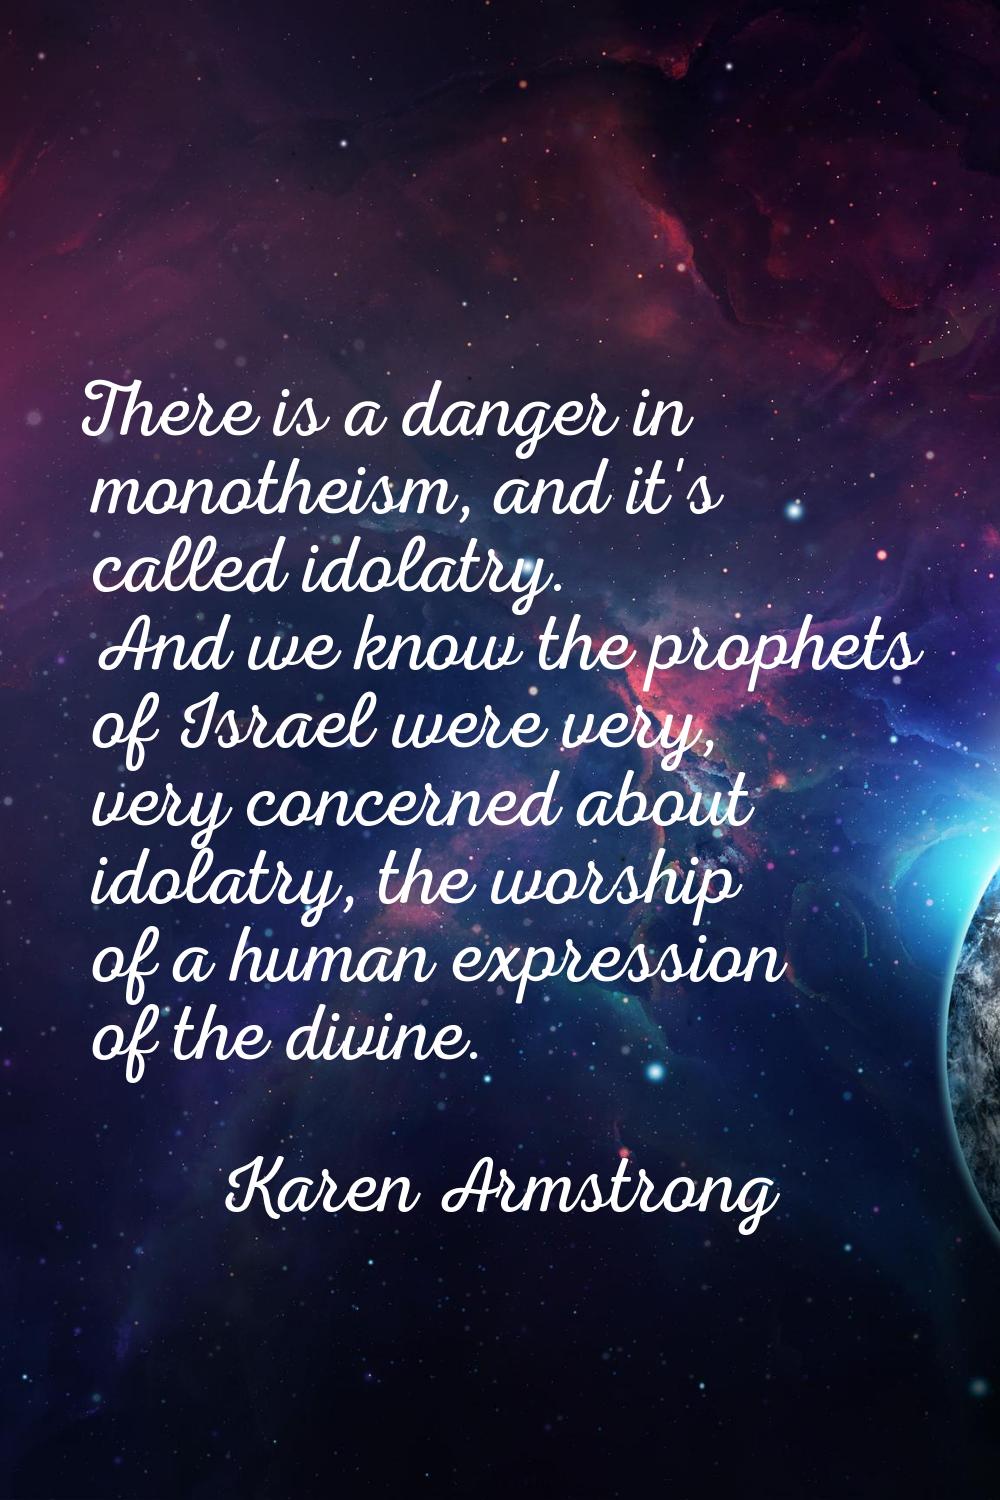 There is a danger in monotheism, and it's called idolatry. And we know the prophets of Israel were 